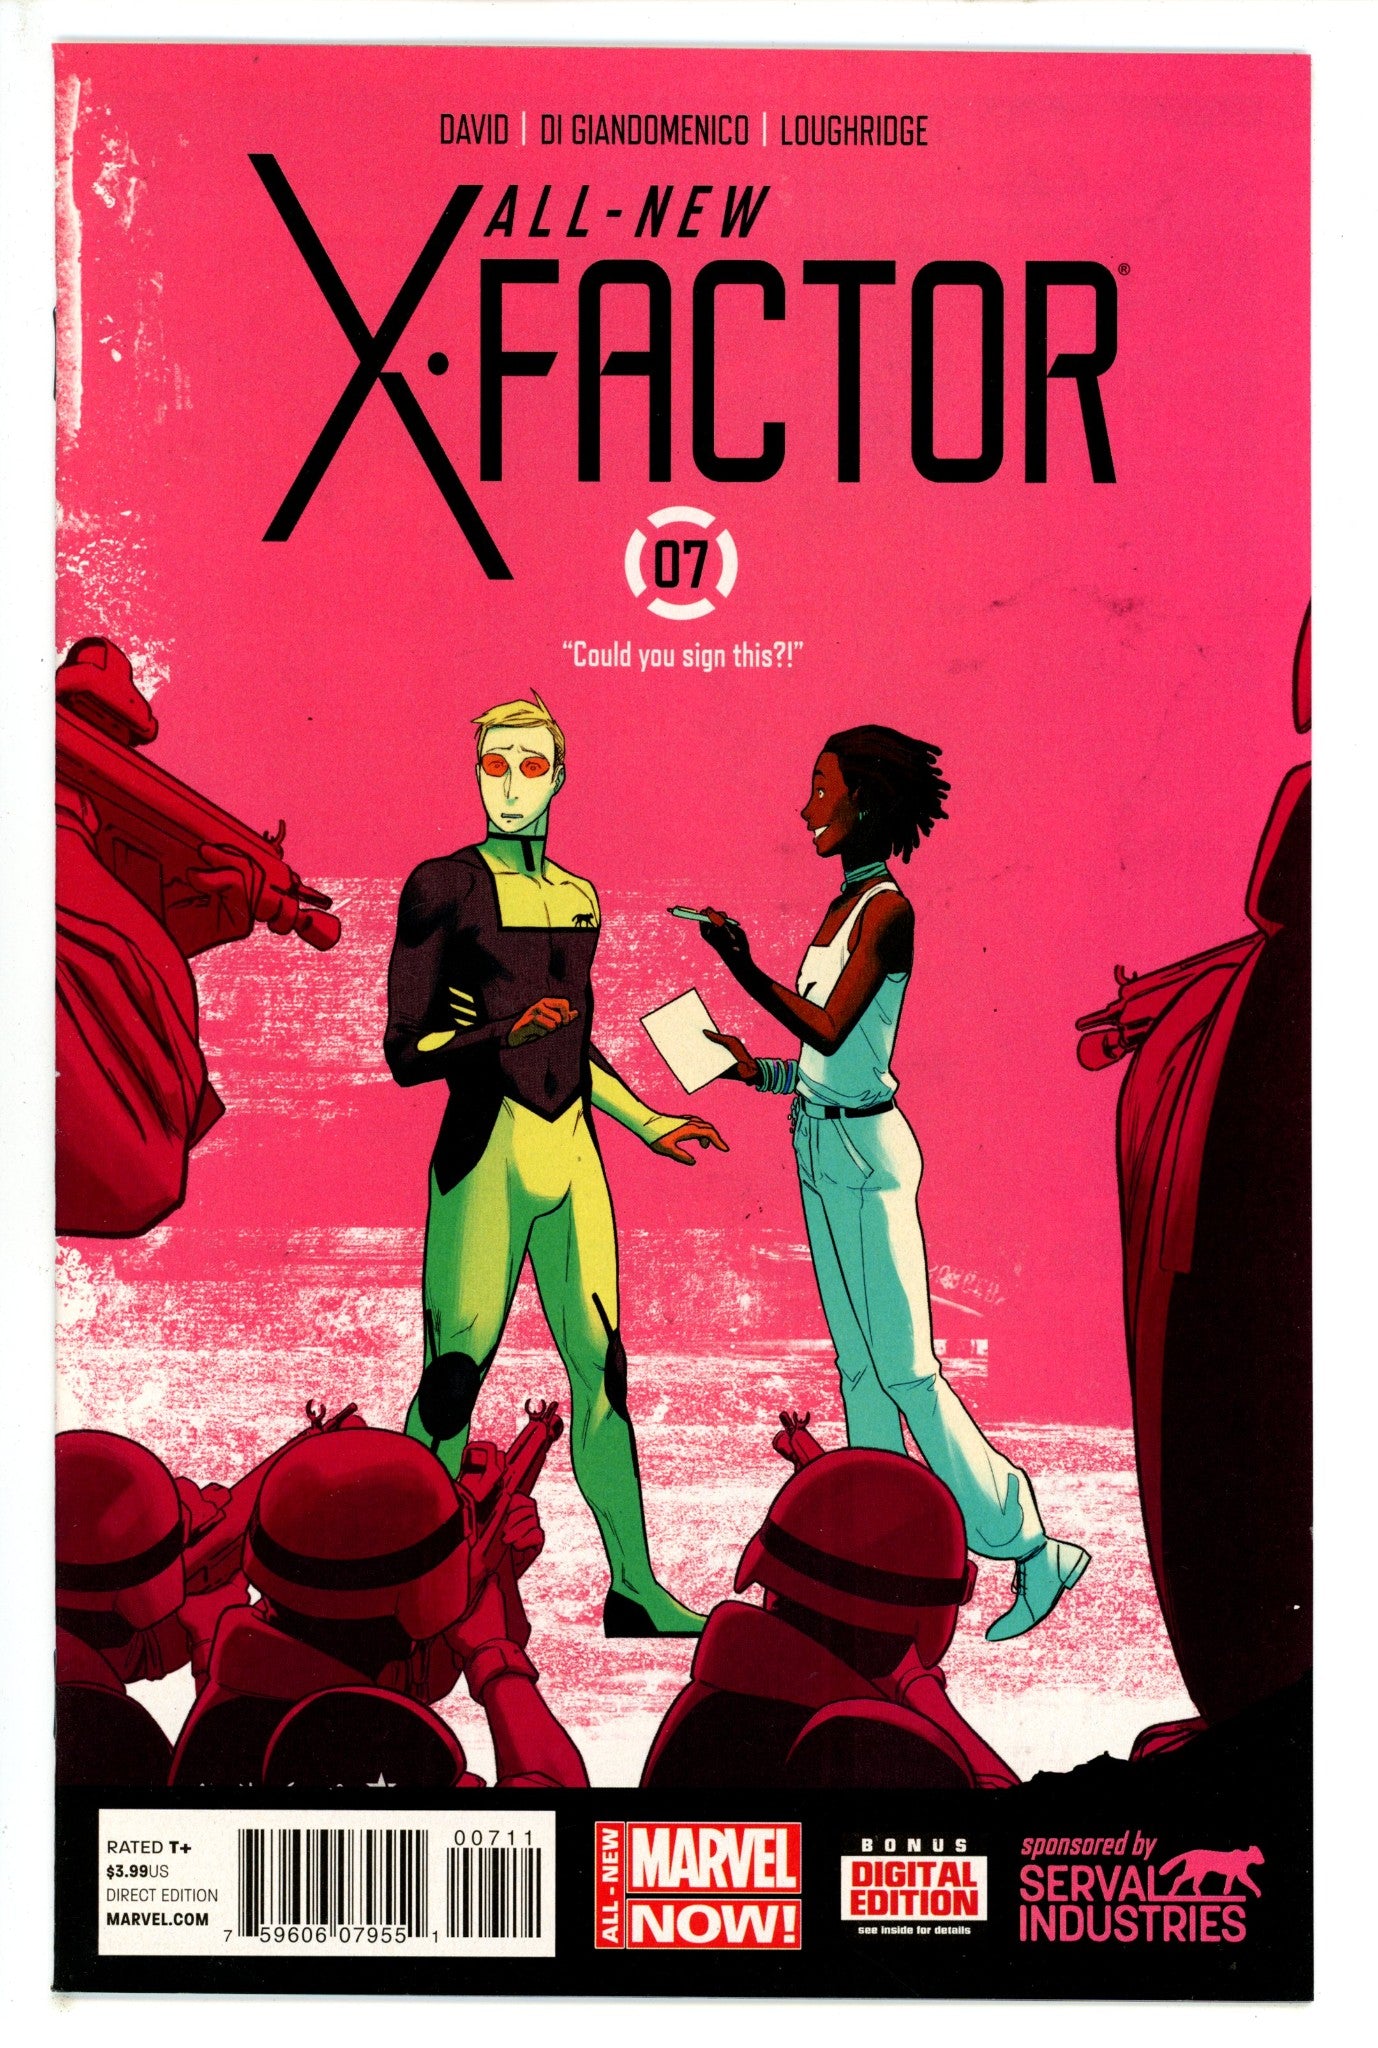 All-New X-Factor 7 (2014)